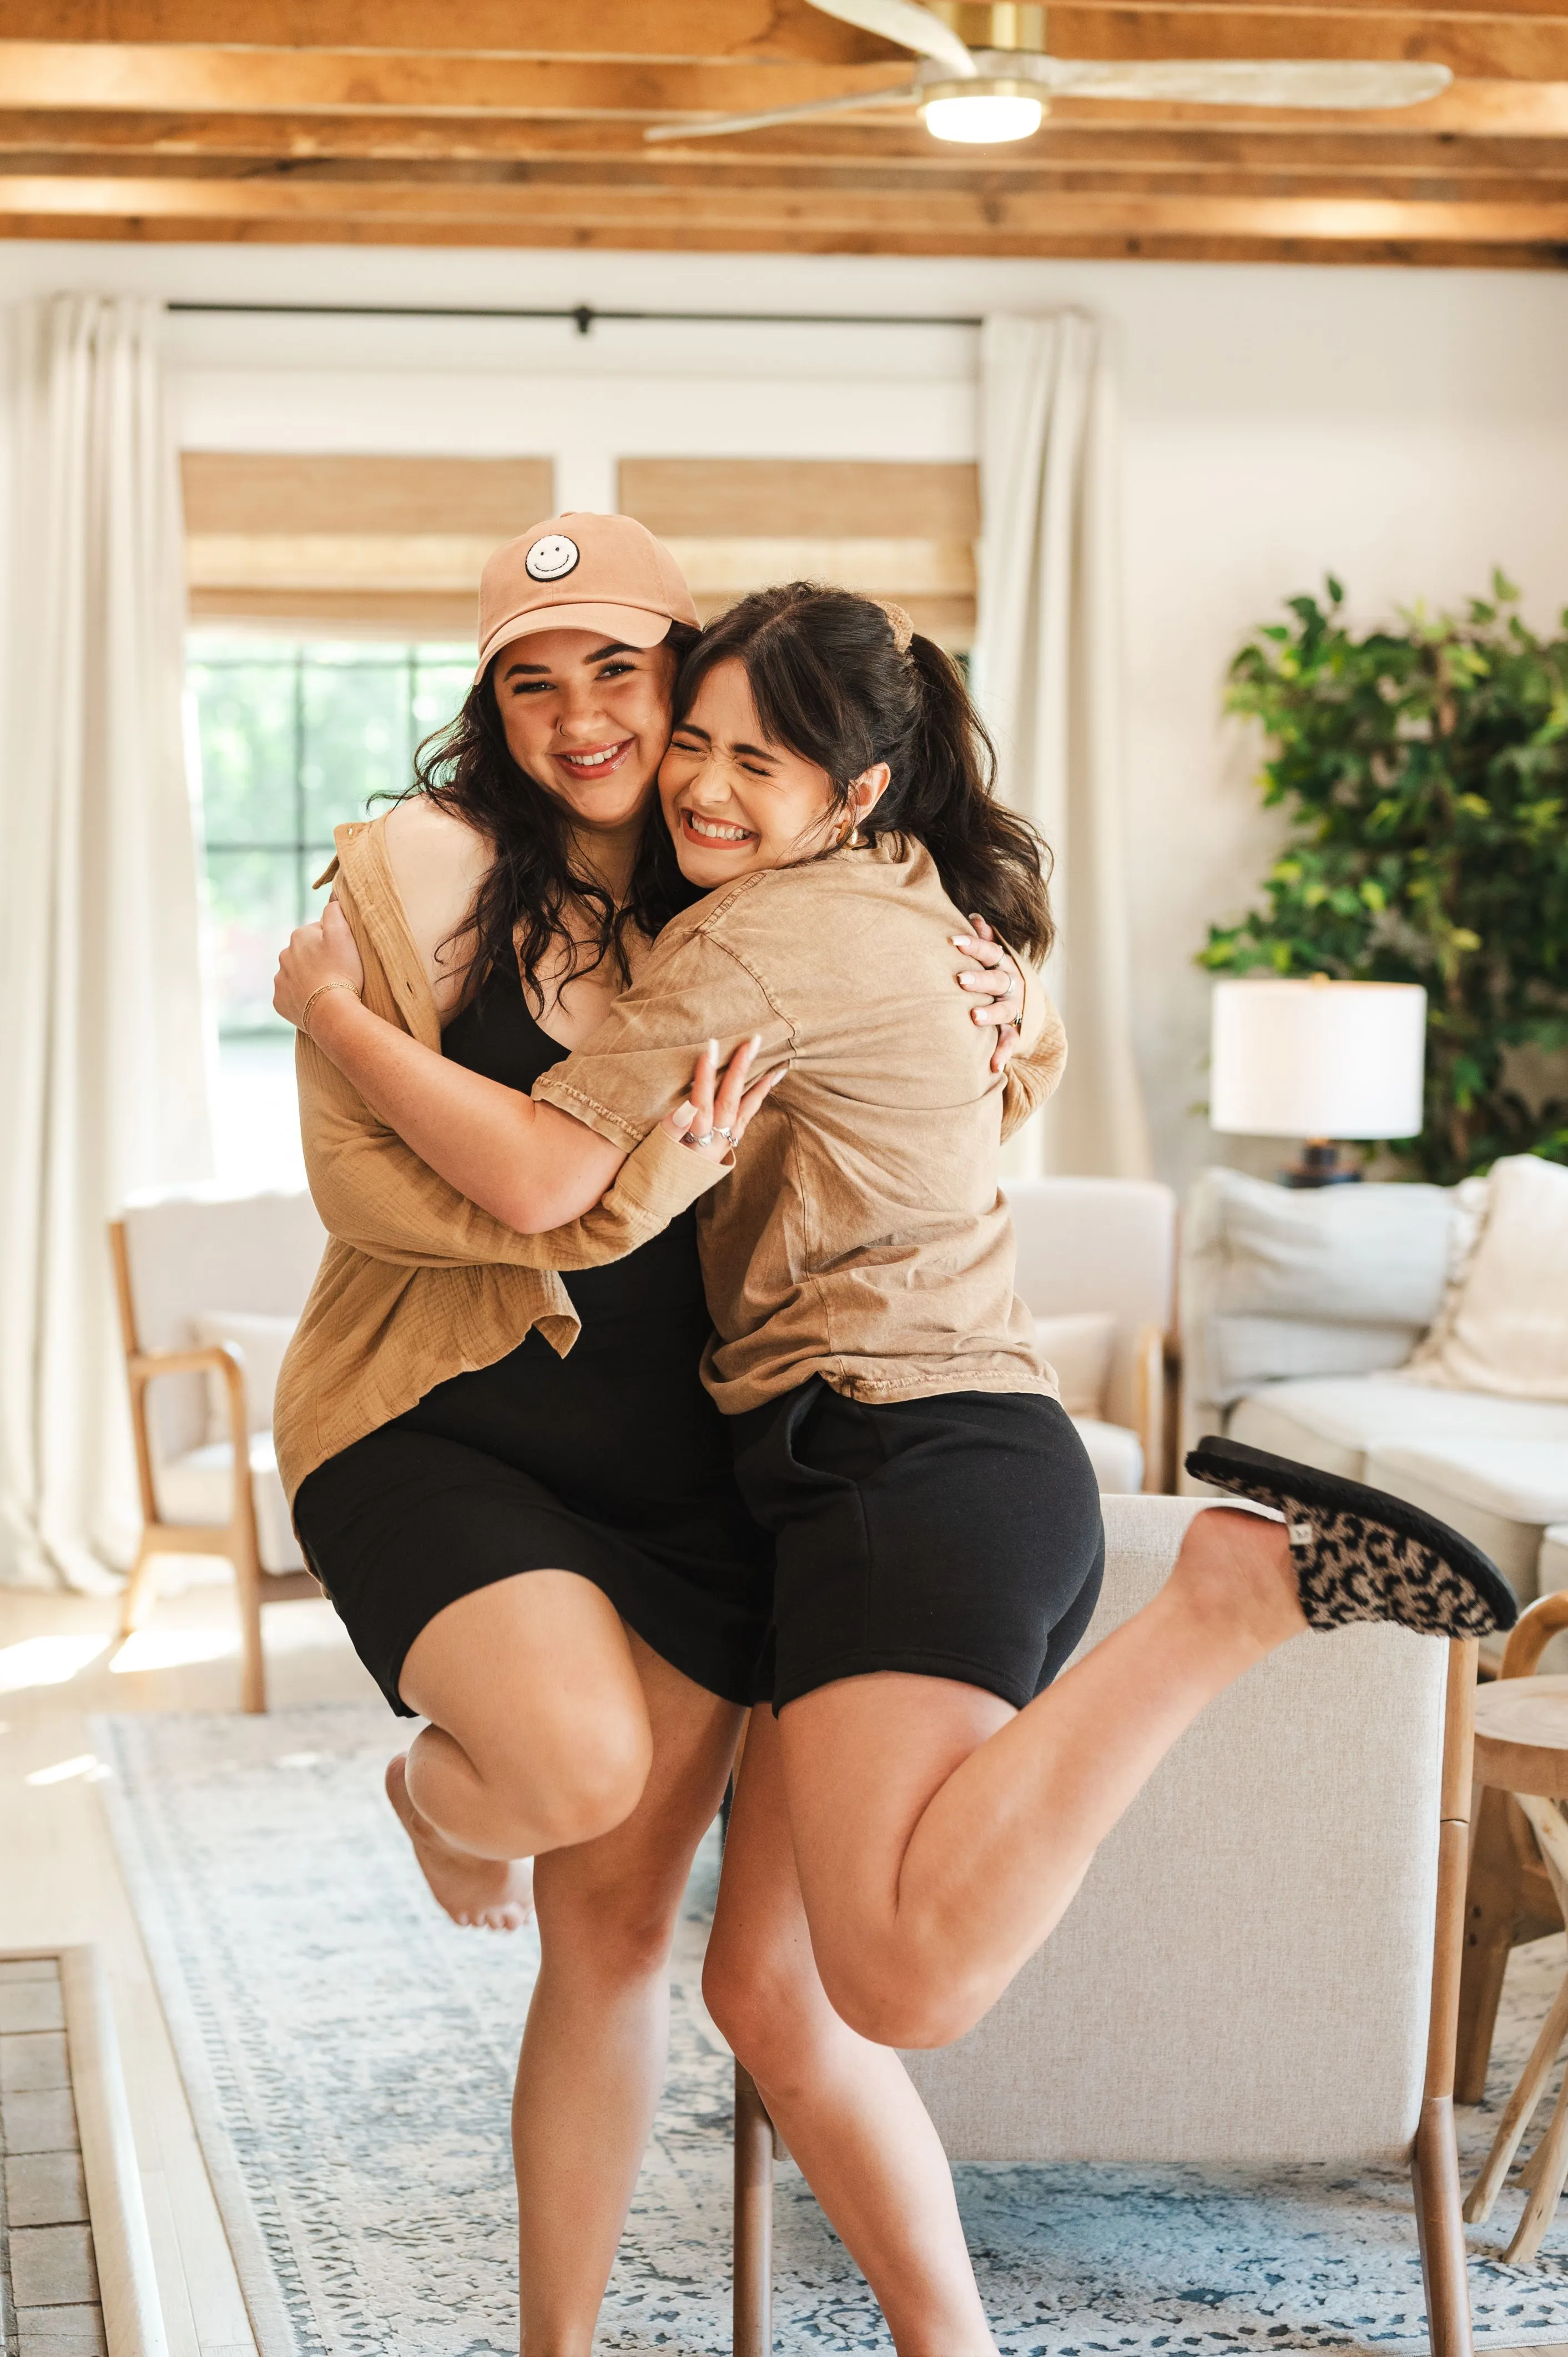 Two happy women embracing and smiling in a cozy living room setting.